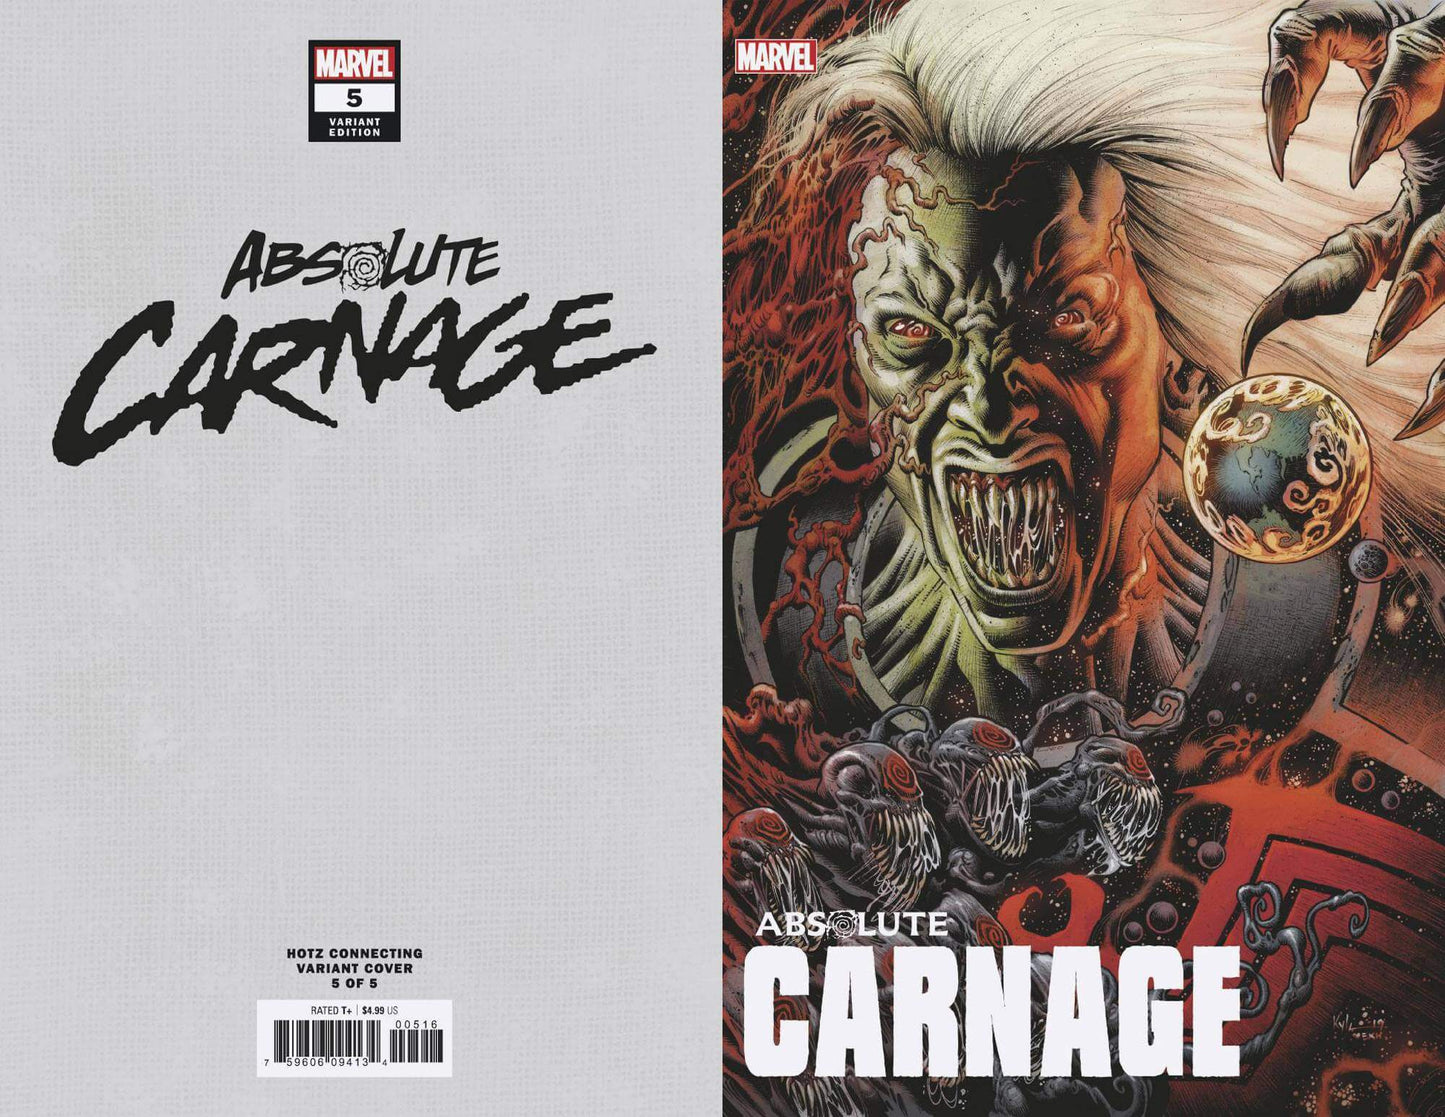 ABSOLUTE CARNAGE #5 (OF 5) E Kyle HOTZ CONNECTING Variant AC Knull (11/20/2019) MARVEL